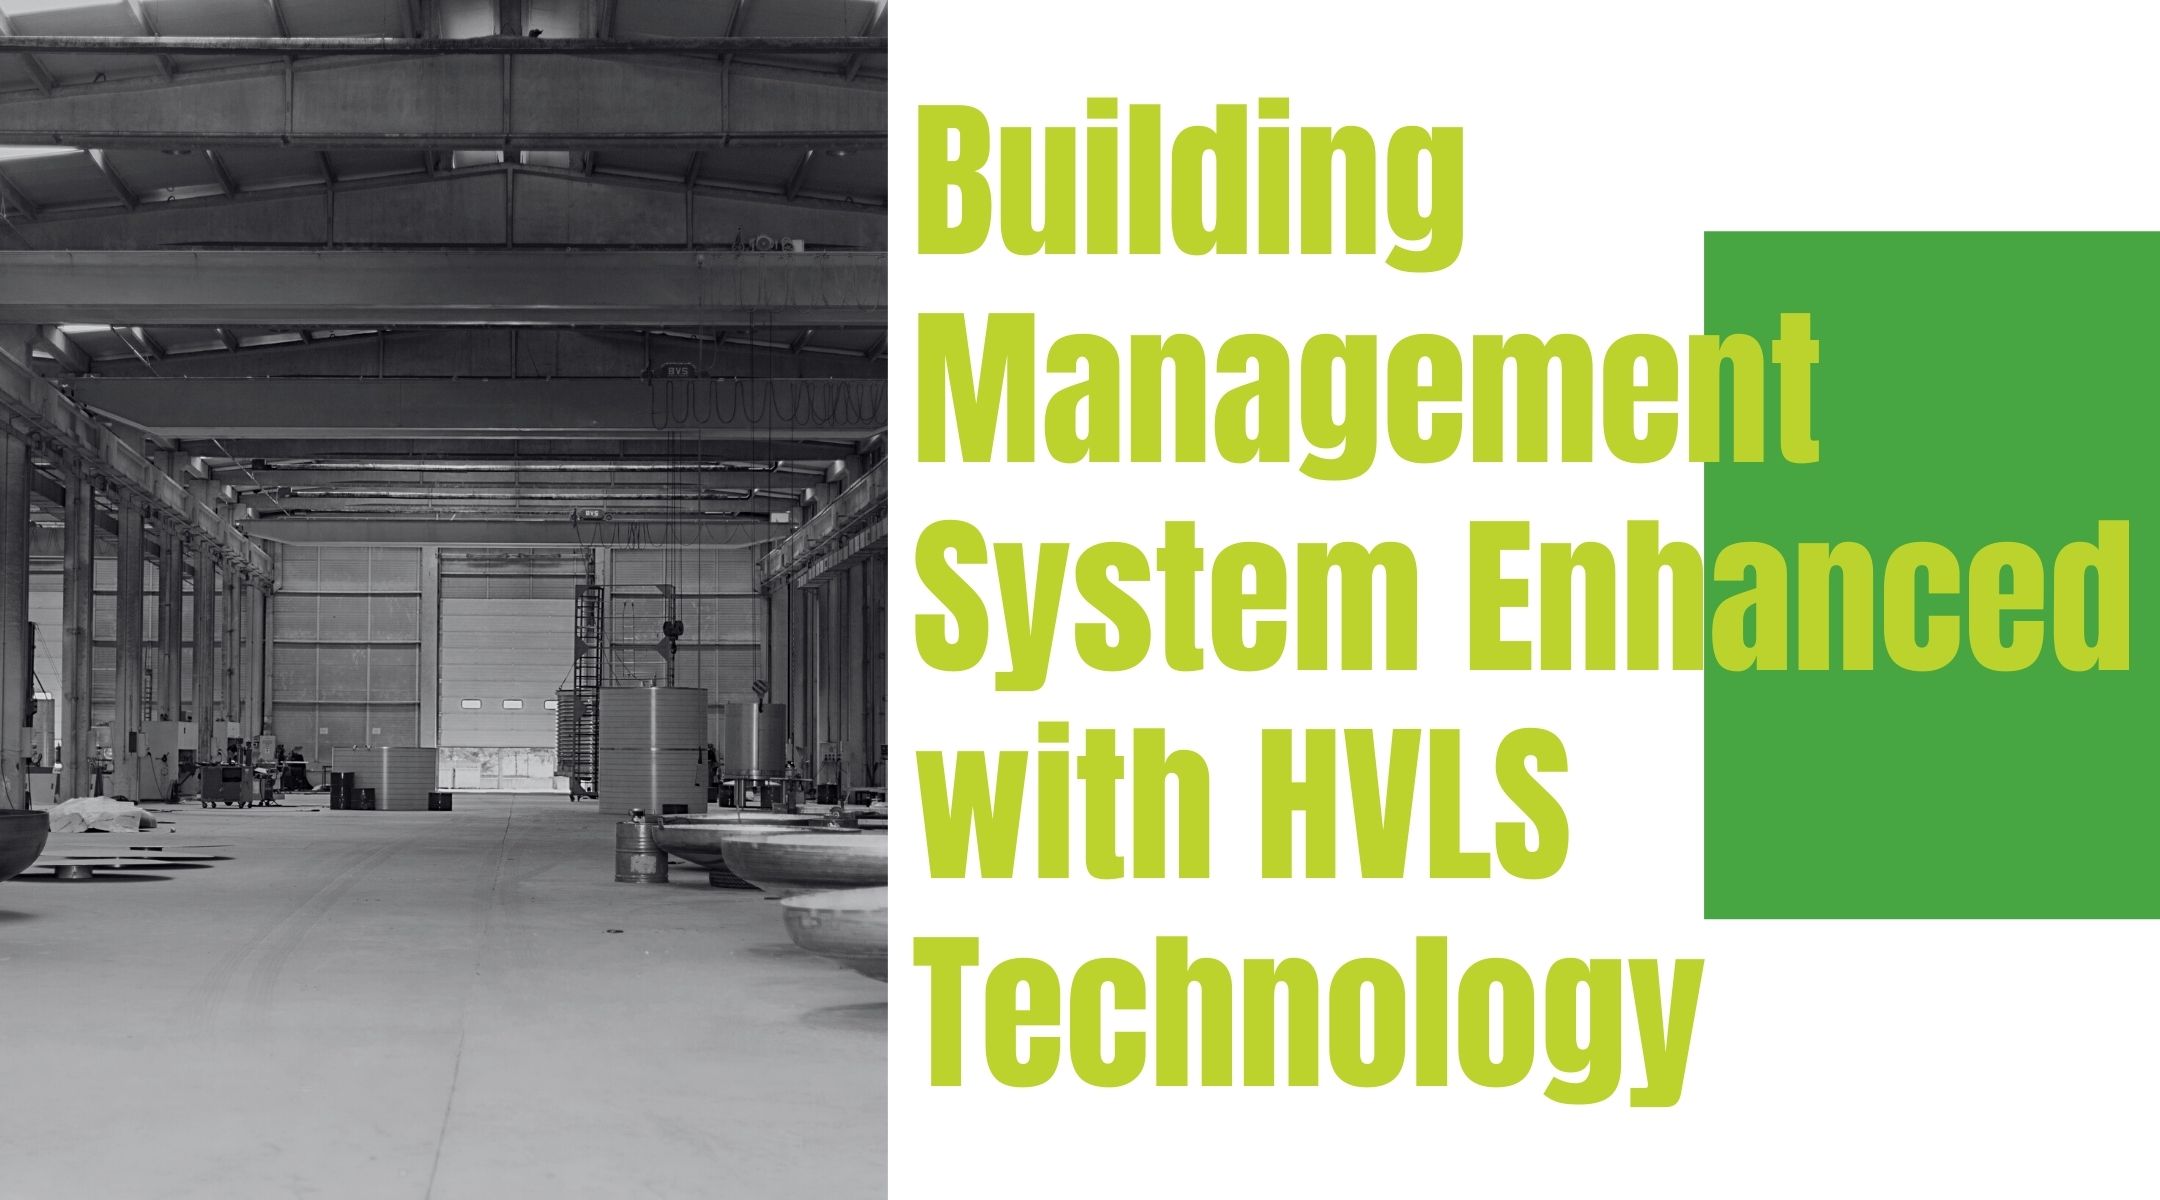 Building Management System Enhanced with HVLS Technology